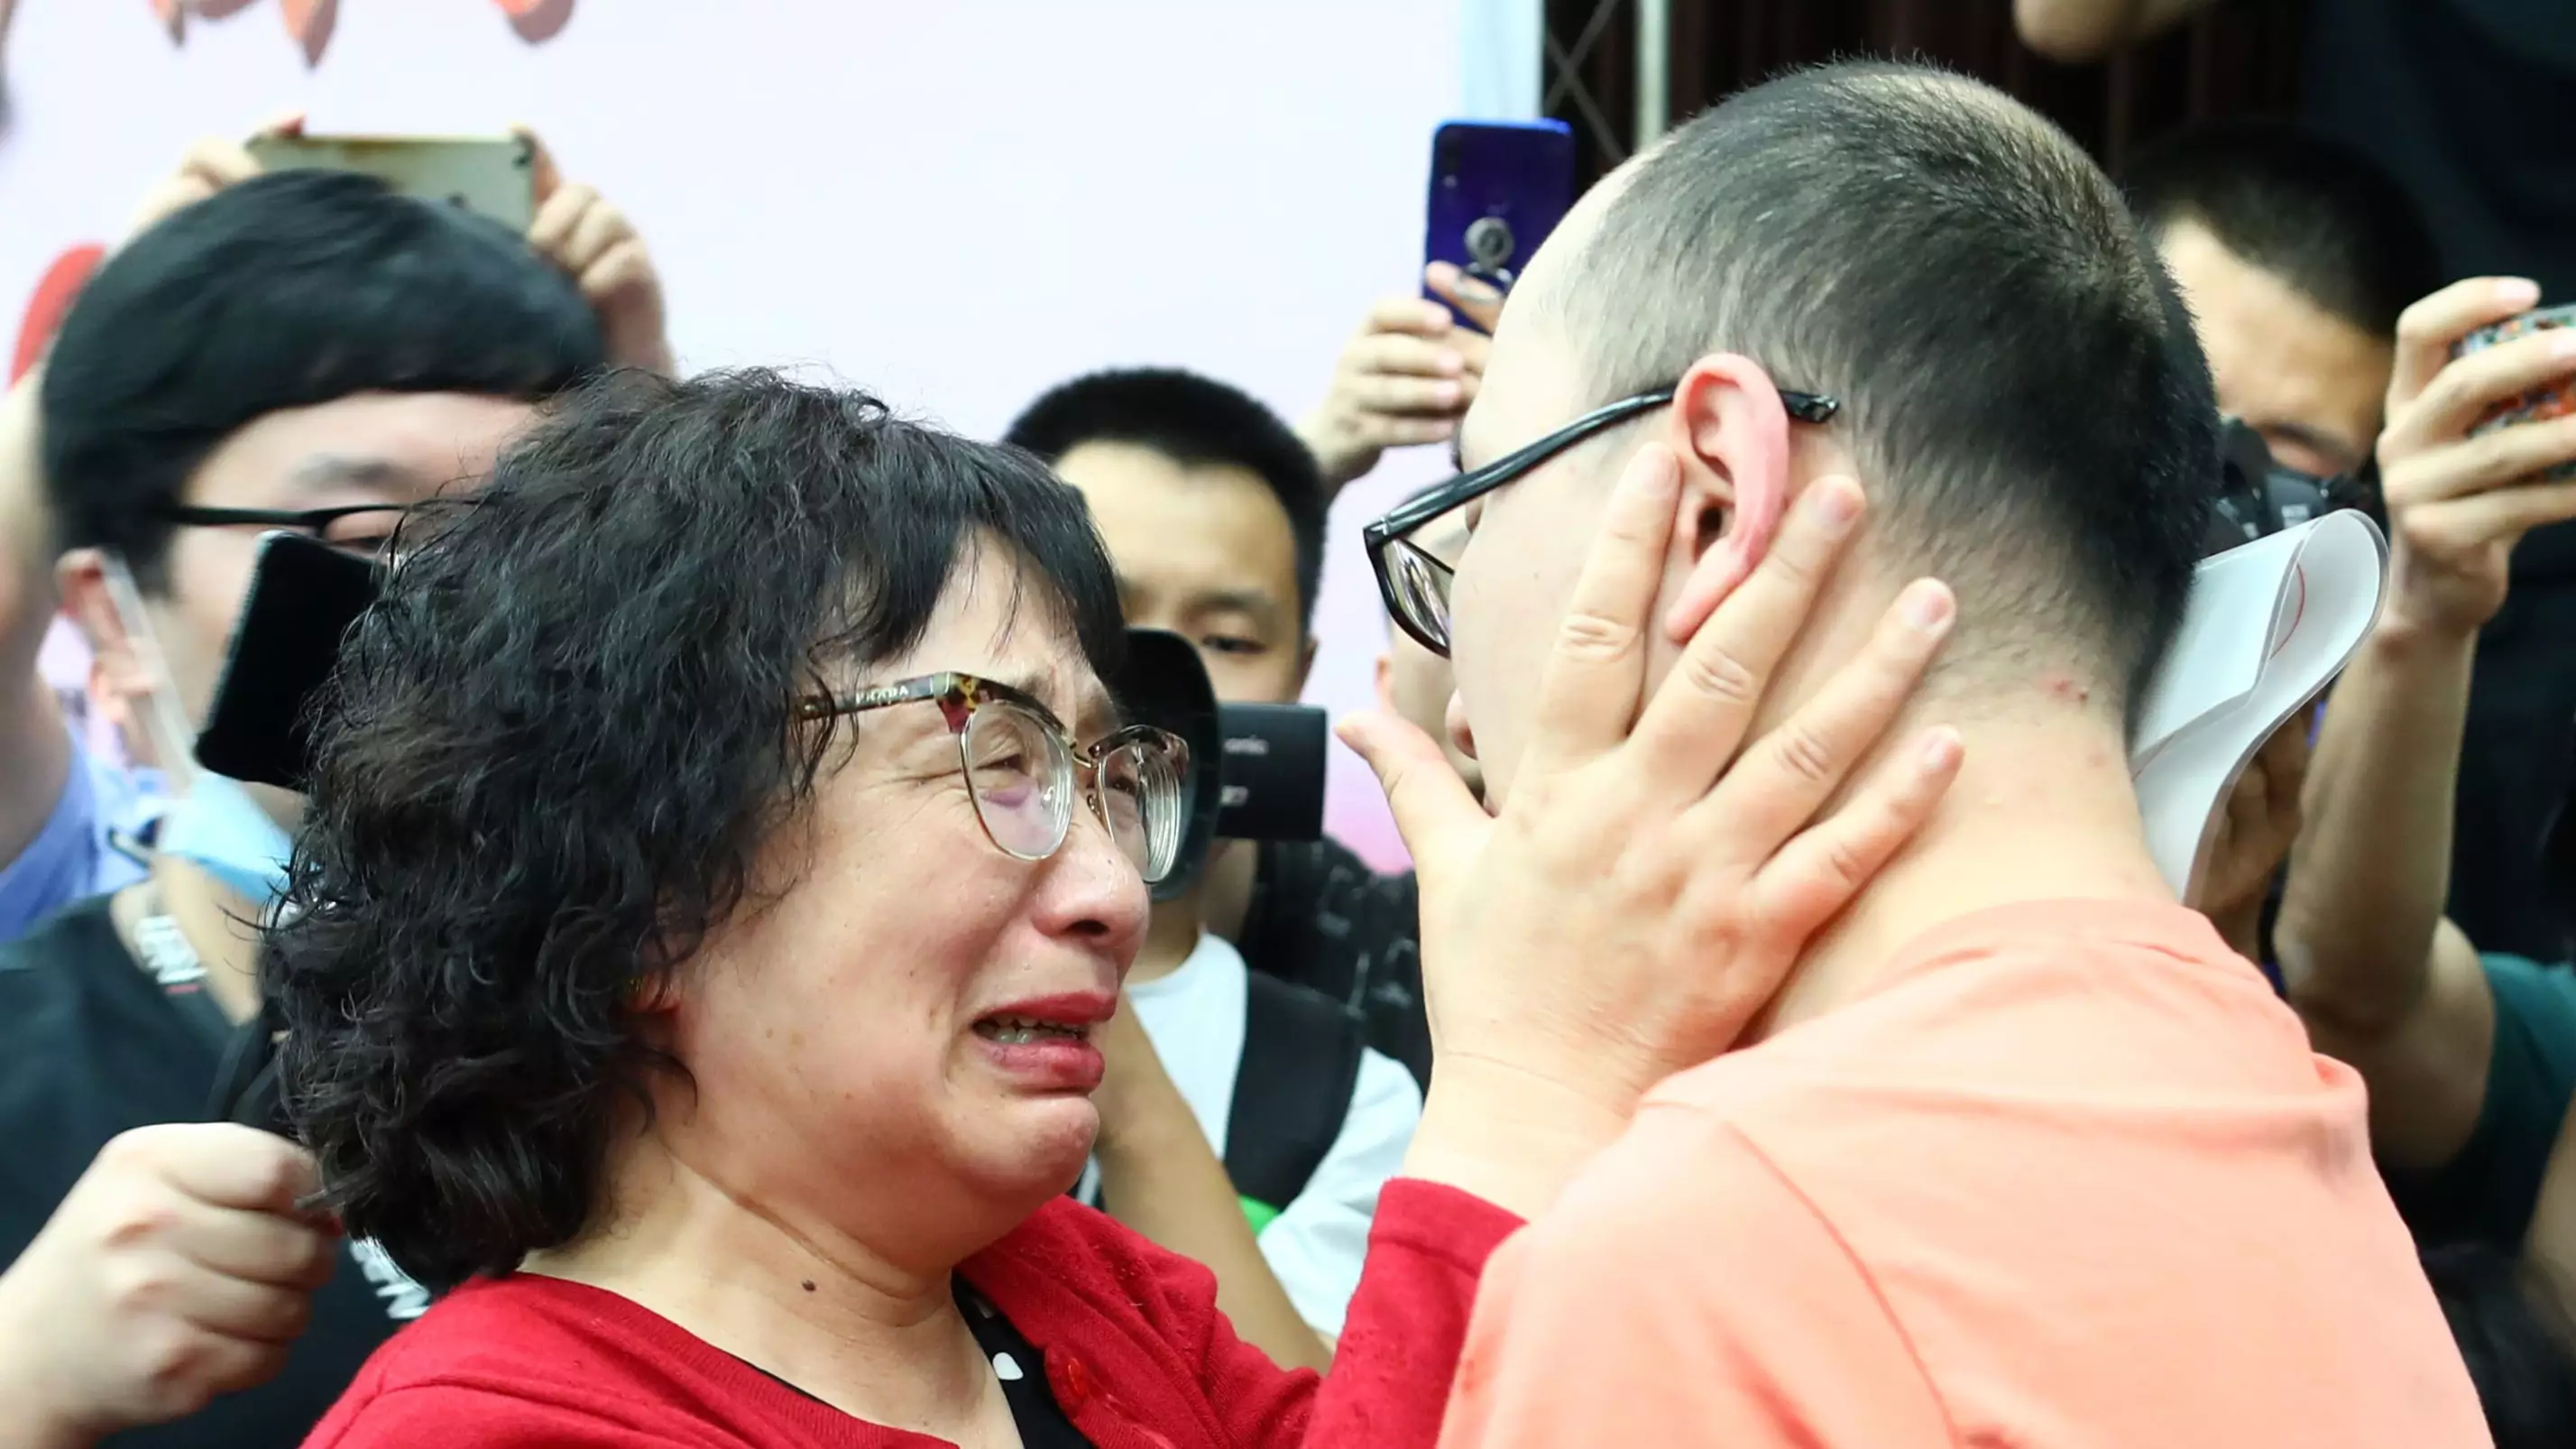 Man Abducted At Two Years Old Is Reunited With Parents After 32 Years